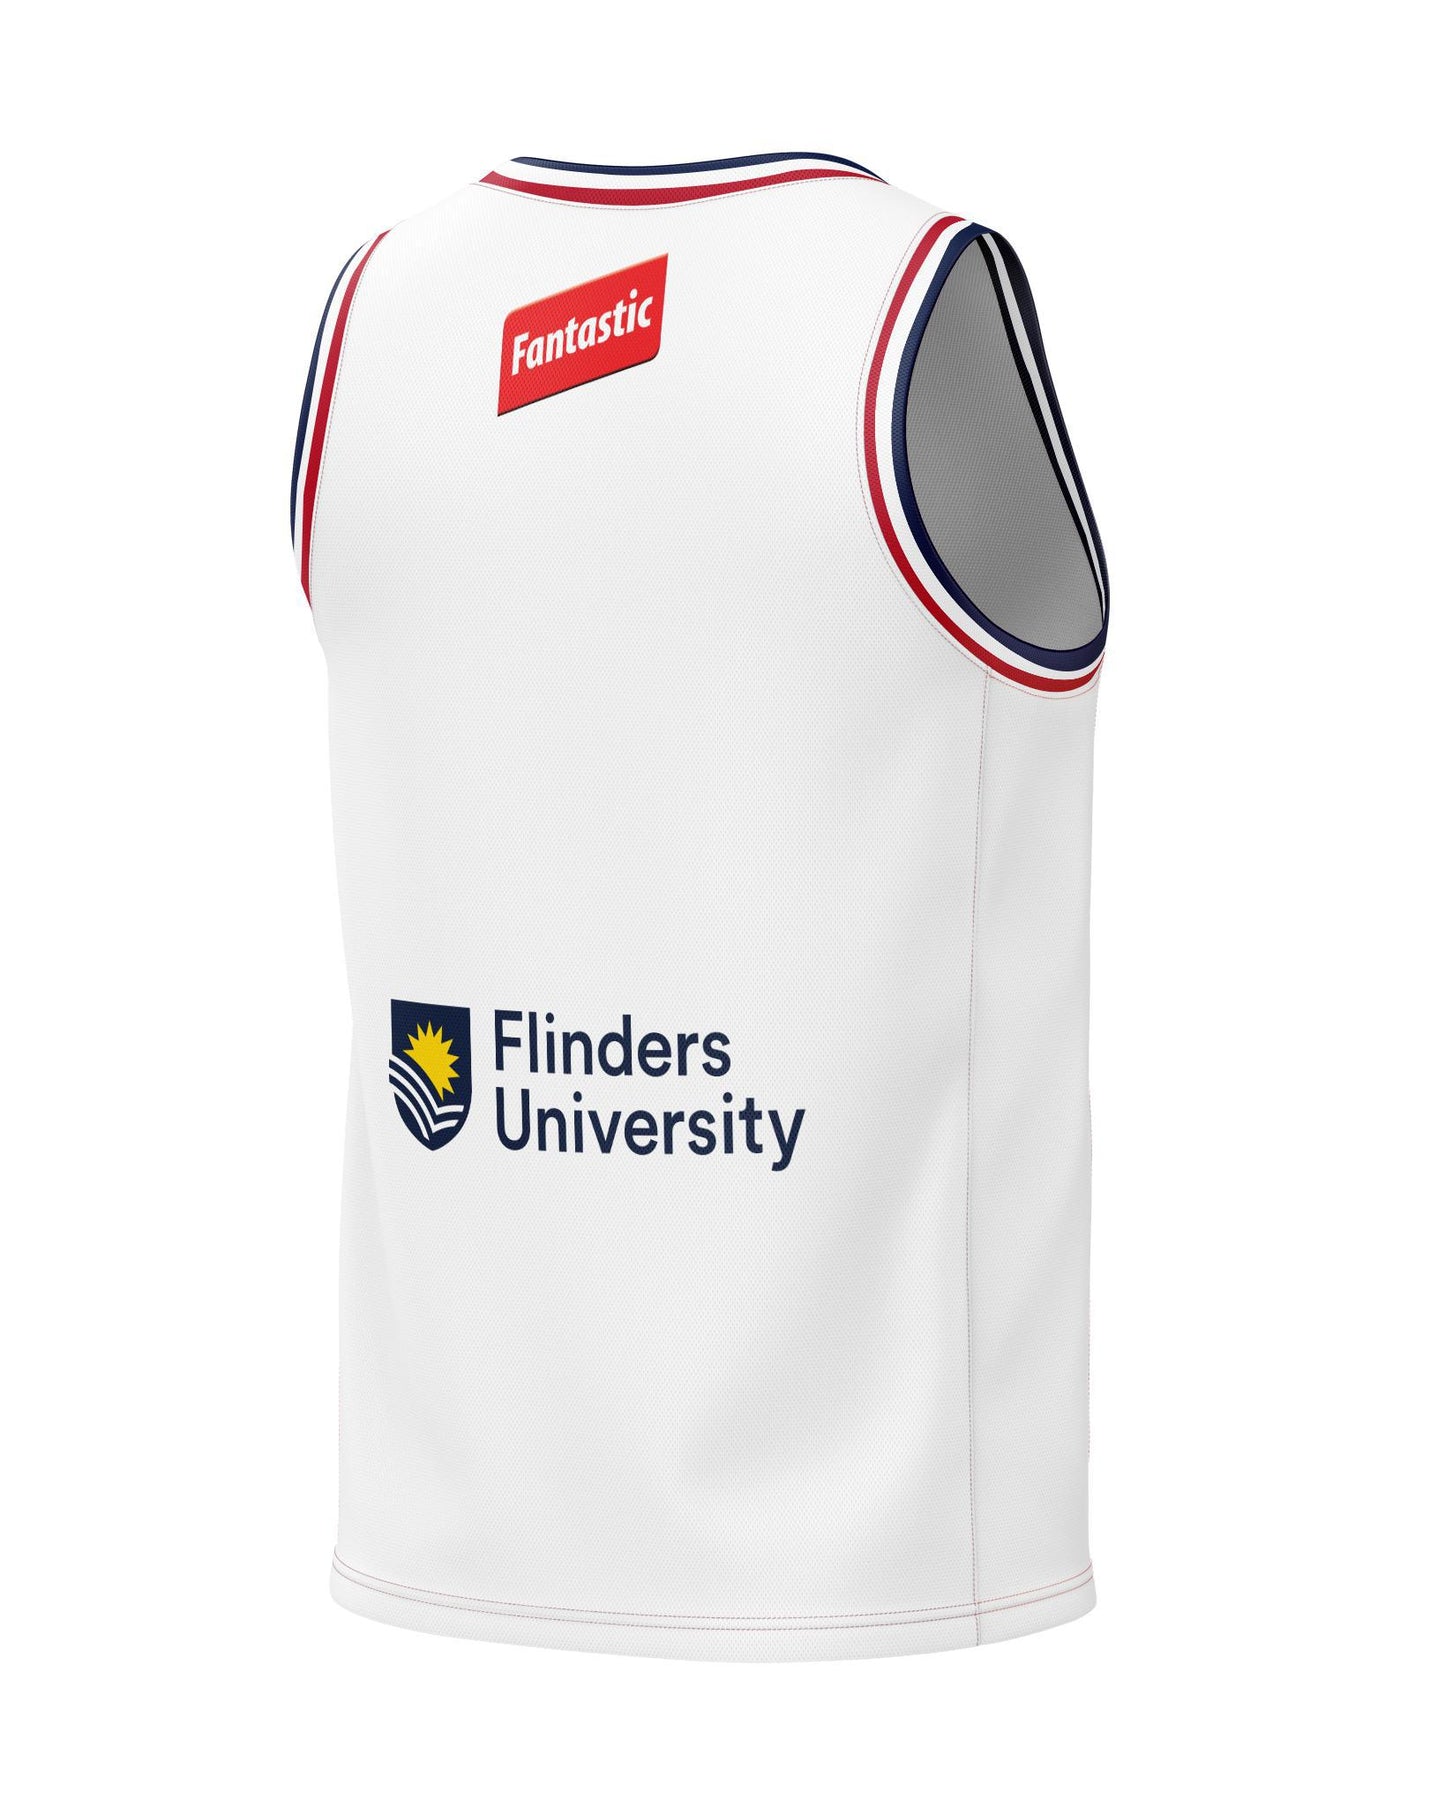 NBL24 Adult Adelaide 36ers Away Jersey